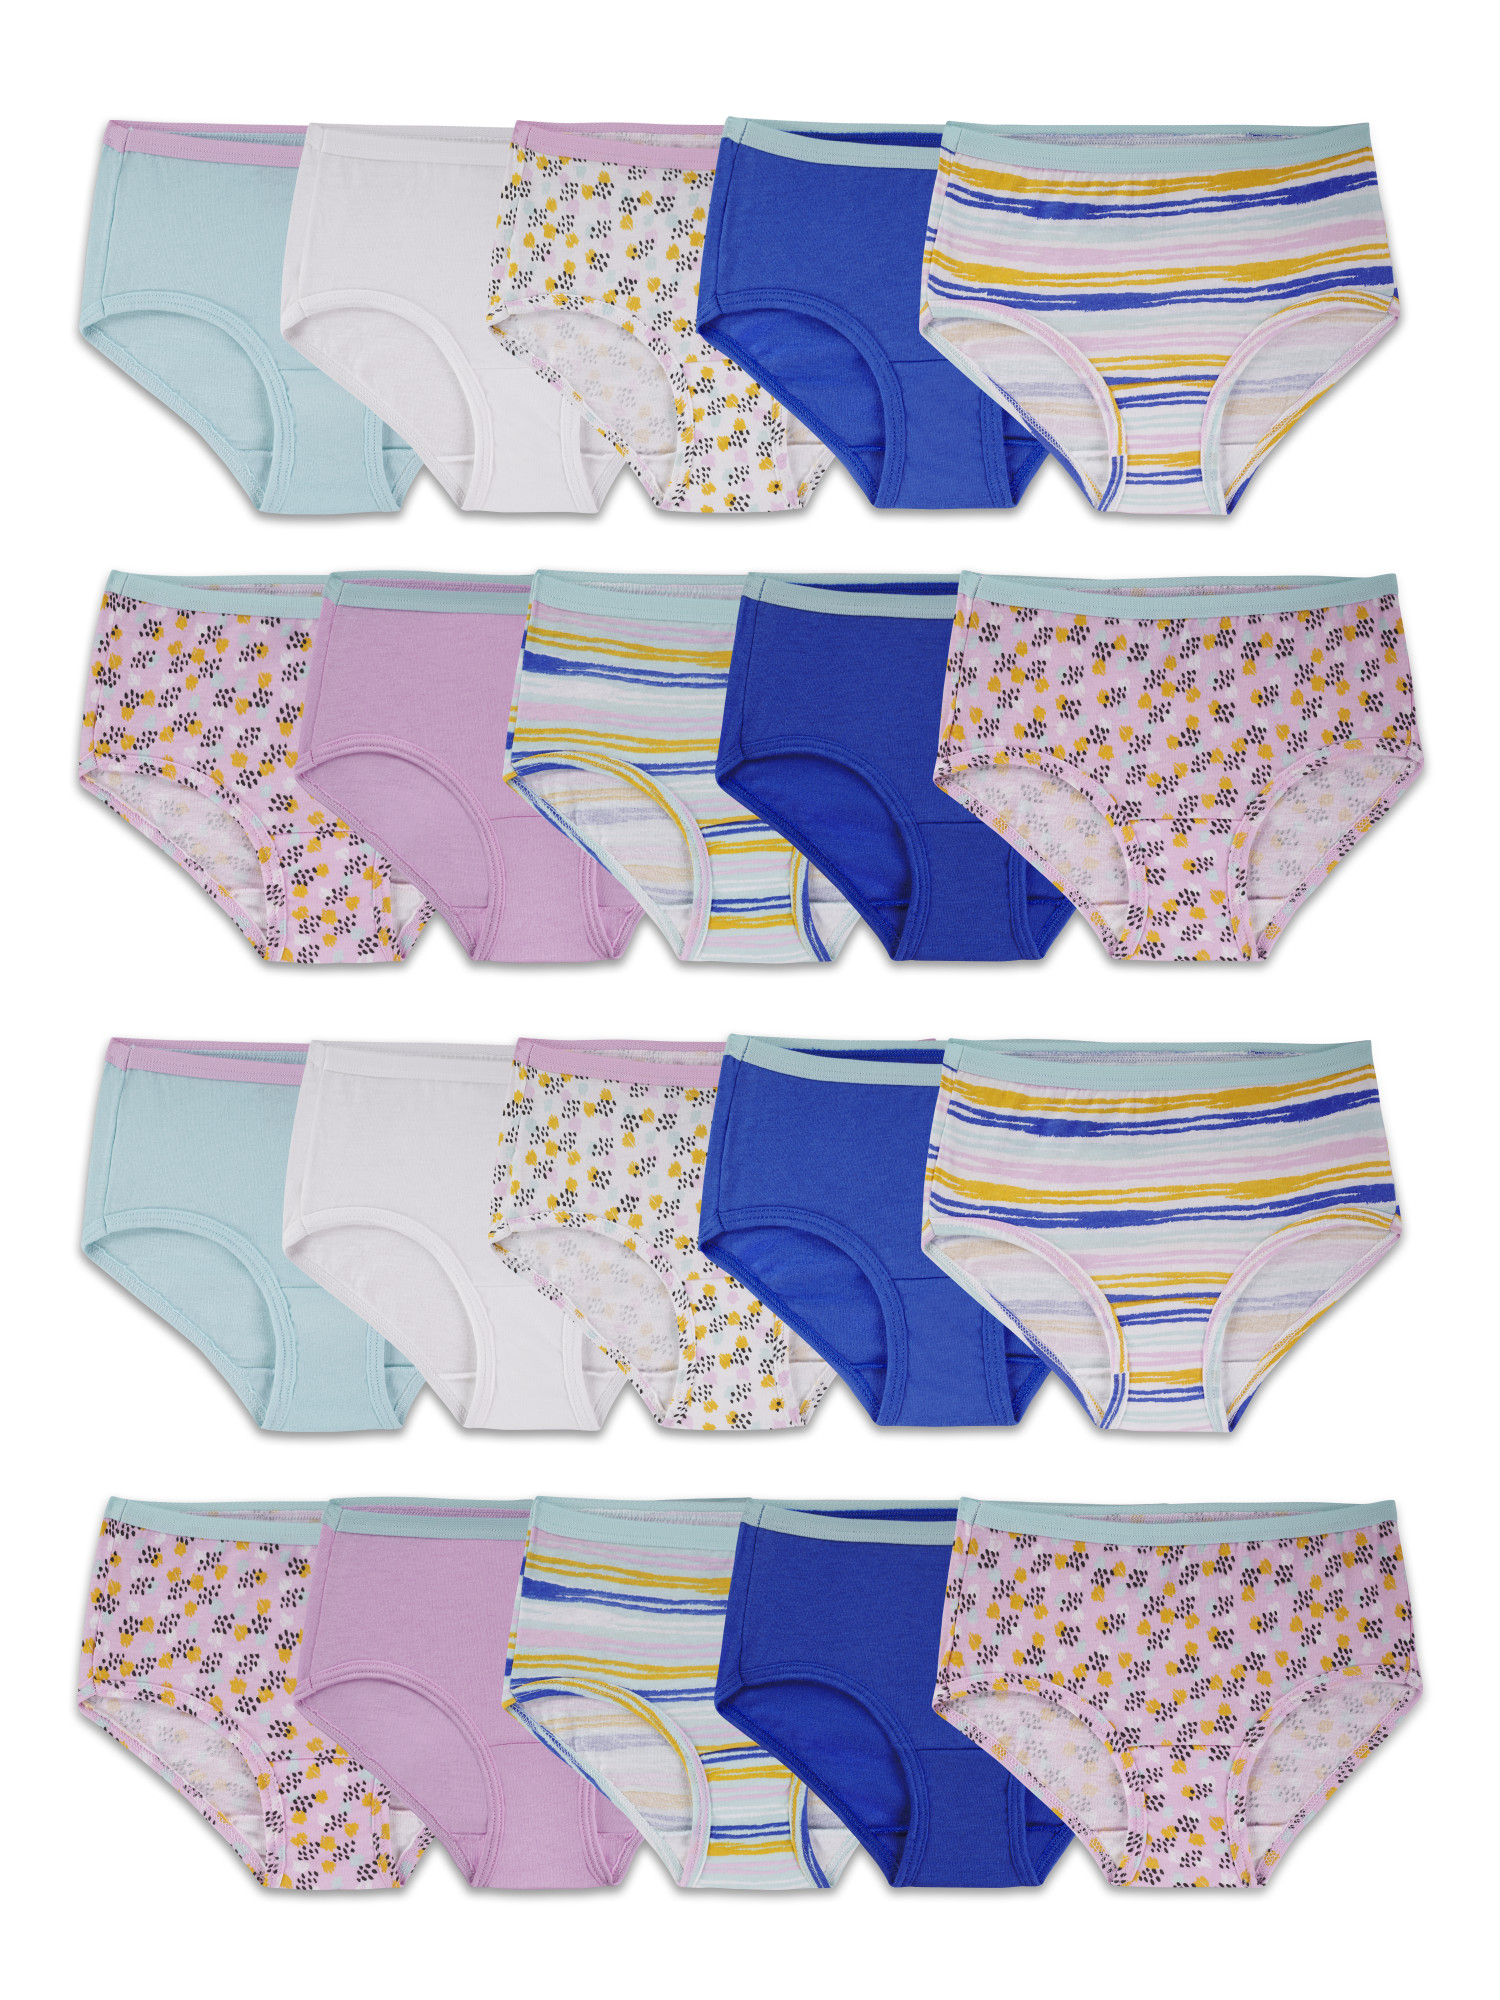 Fruit of the Loom Girls' Cotton Brief Underwear, 20 Pack - image 1 of 10